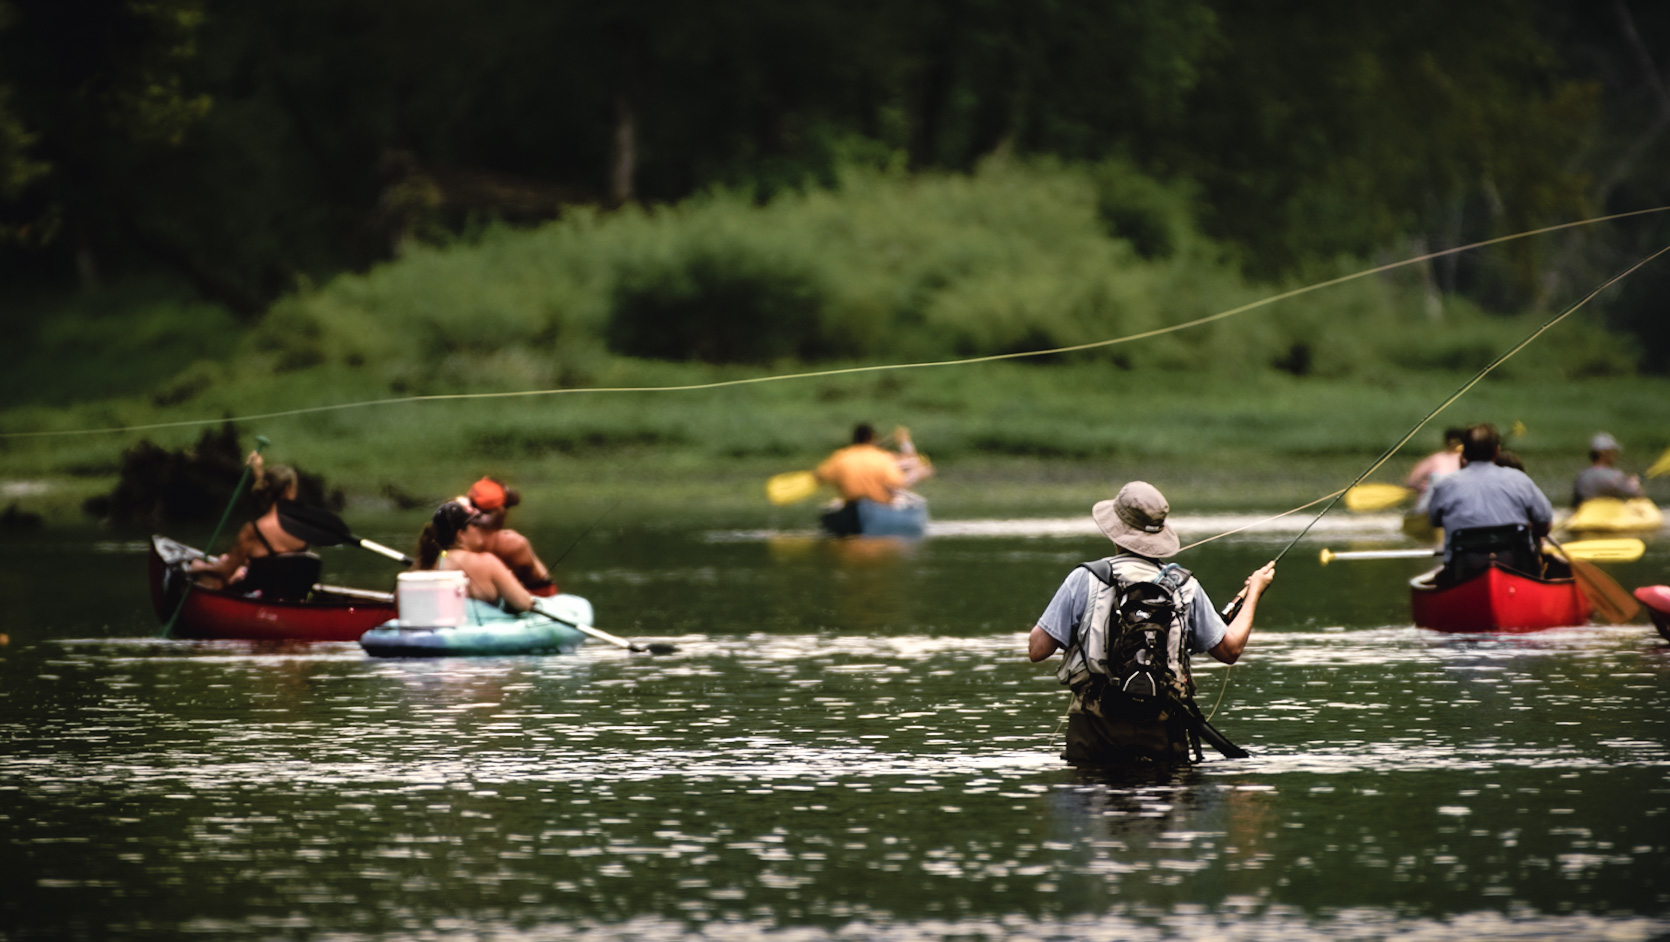 Fly fisherman surrounded by kayakers